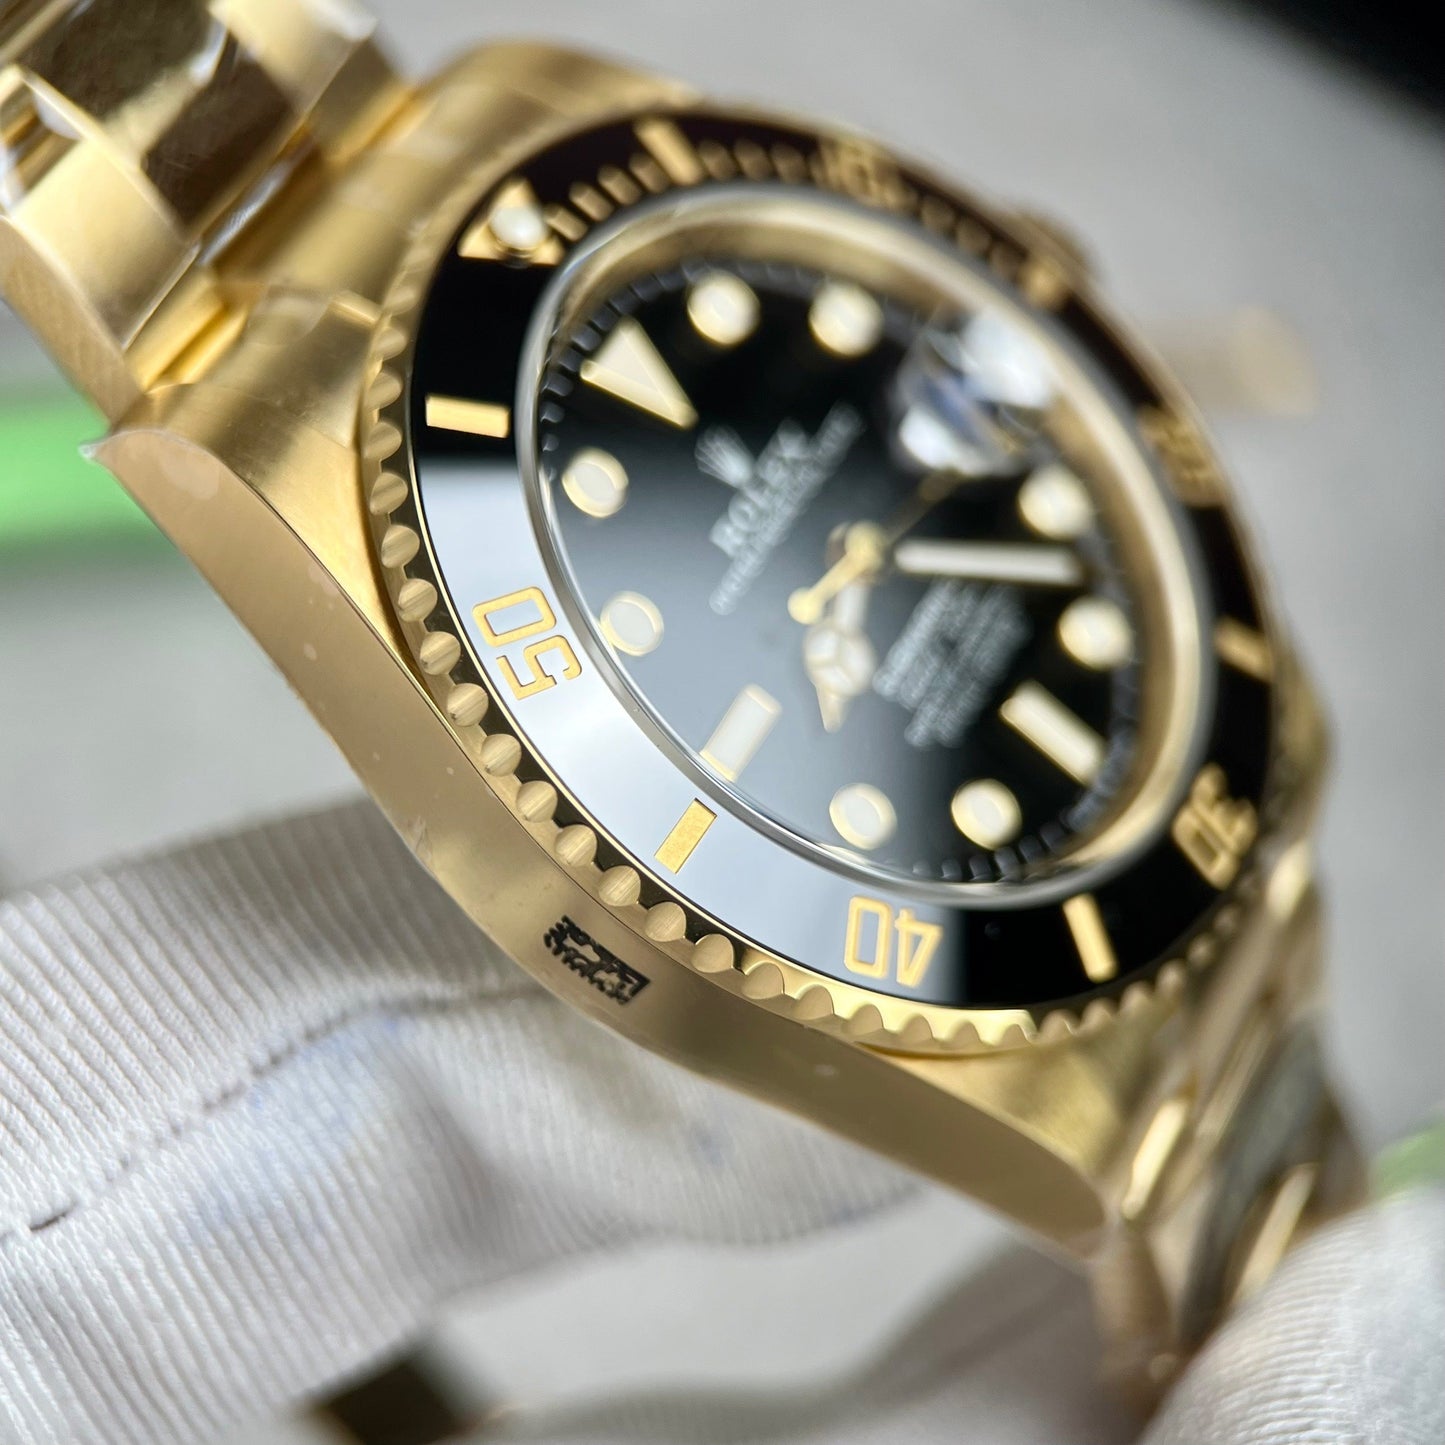 Rolex Submariner Date Black Dial Yellow Gold Men's Watch 126618LN-0002 wrapped 18k gold